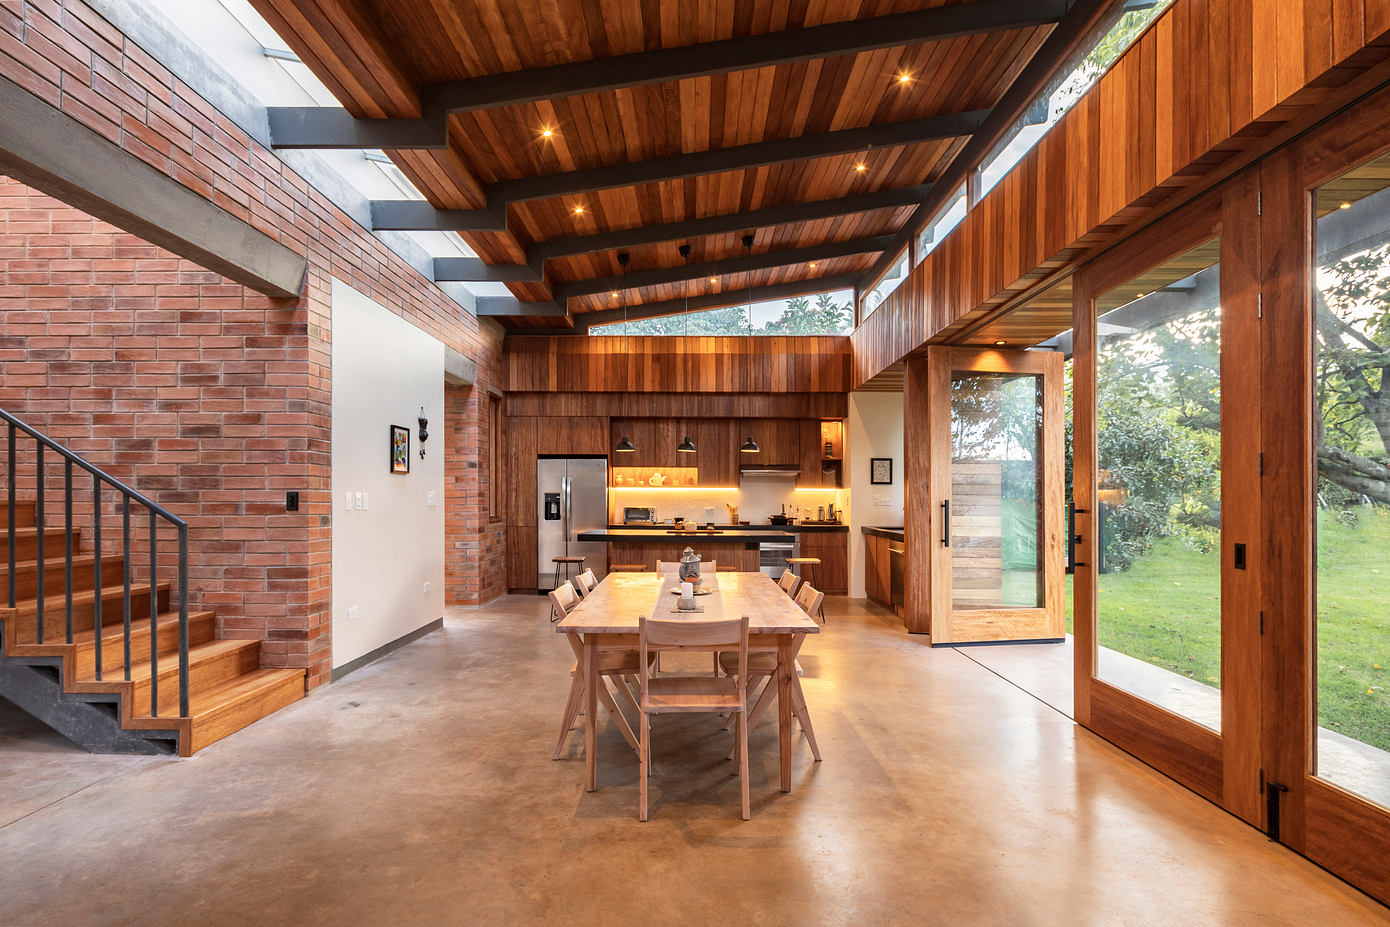 The Block Bond House: Blending Architecture With Nature